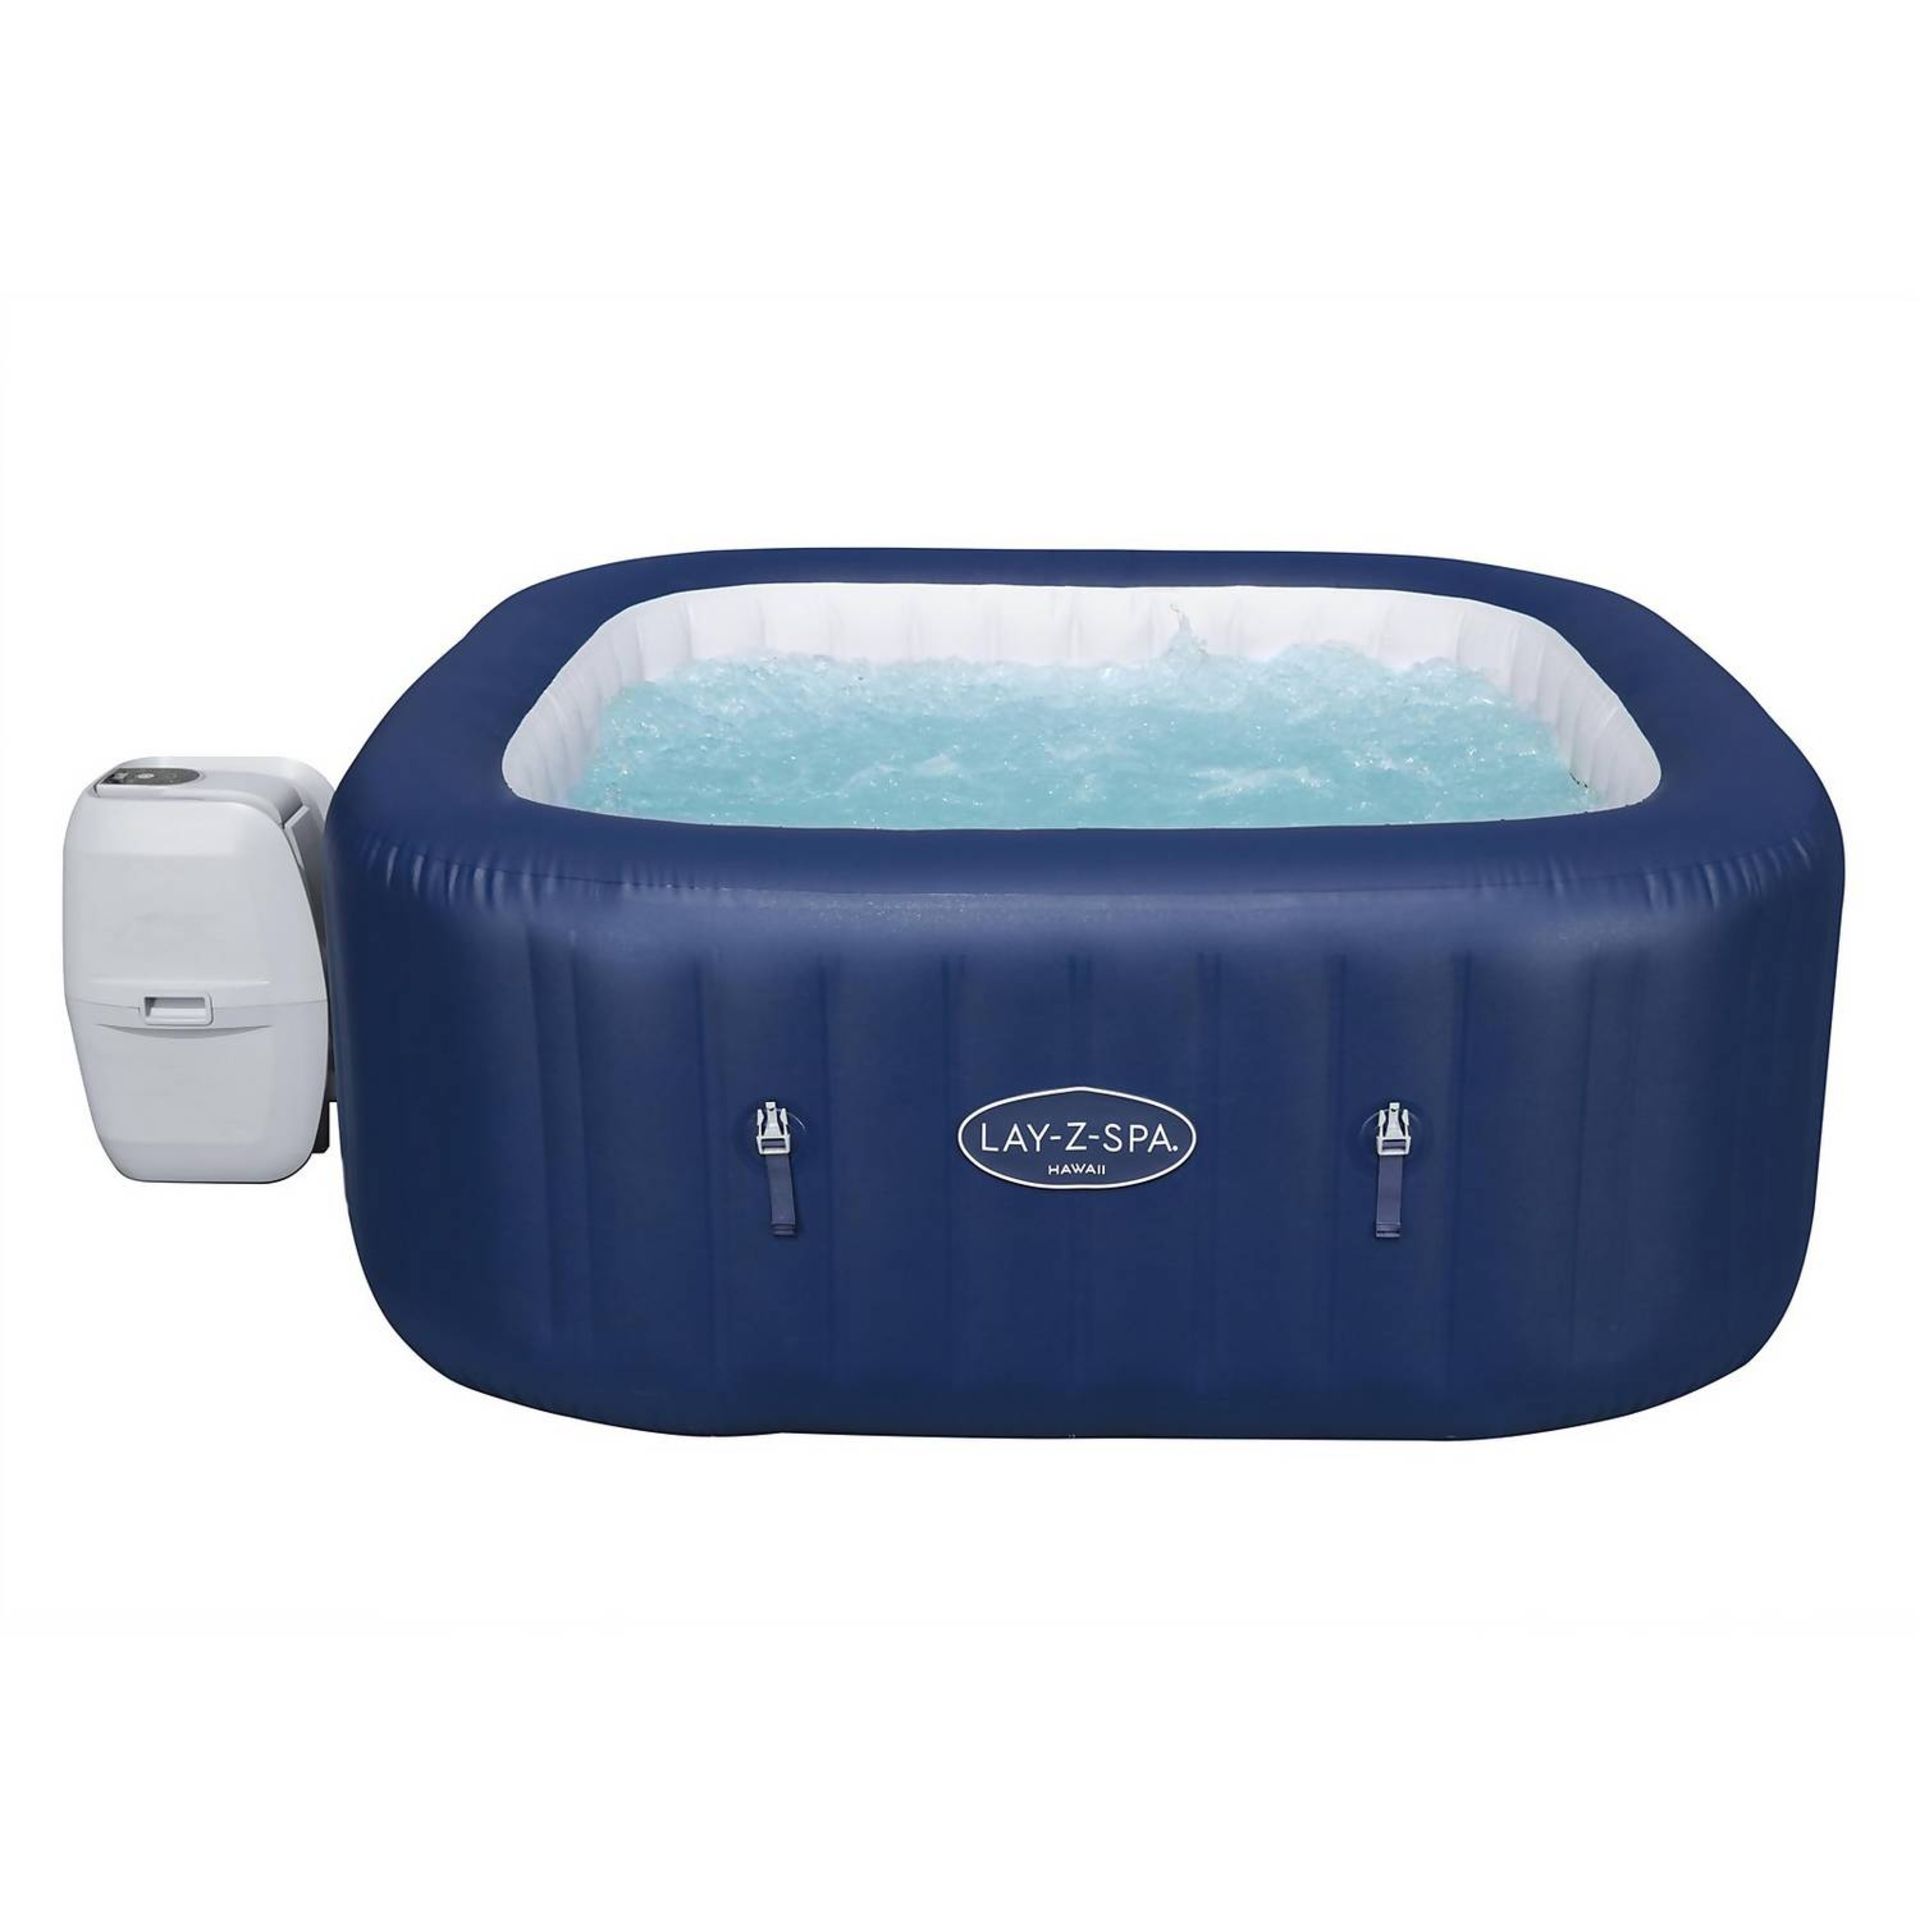 1x Bestway Lay-Z-Spa Hawaii. Unit Inflates, But No Egg Pump In Lot (Spa Only). Lot Includes Skin &